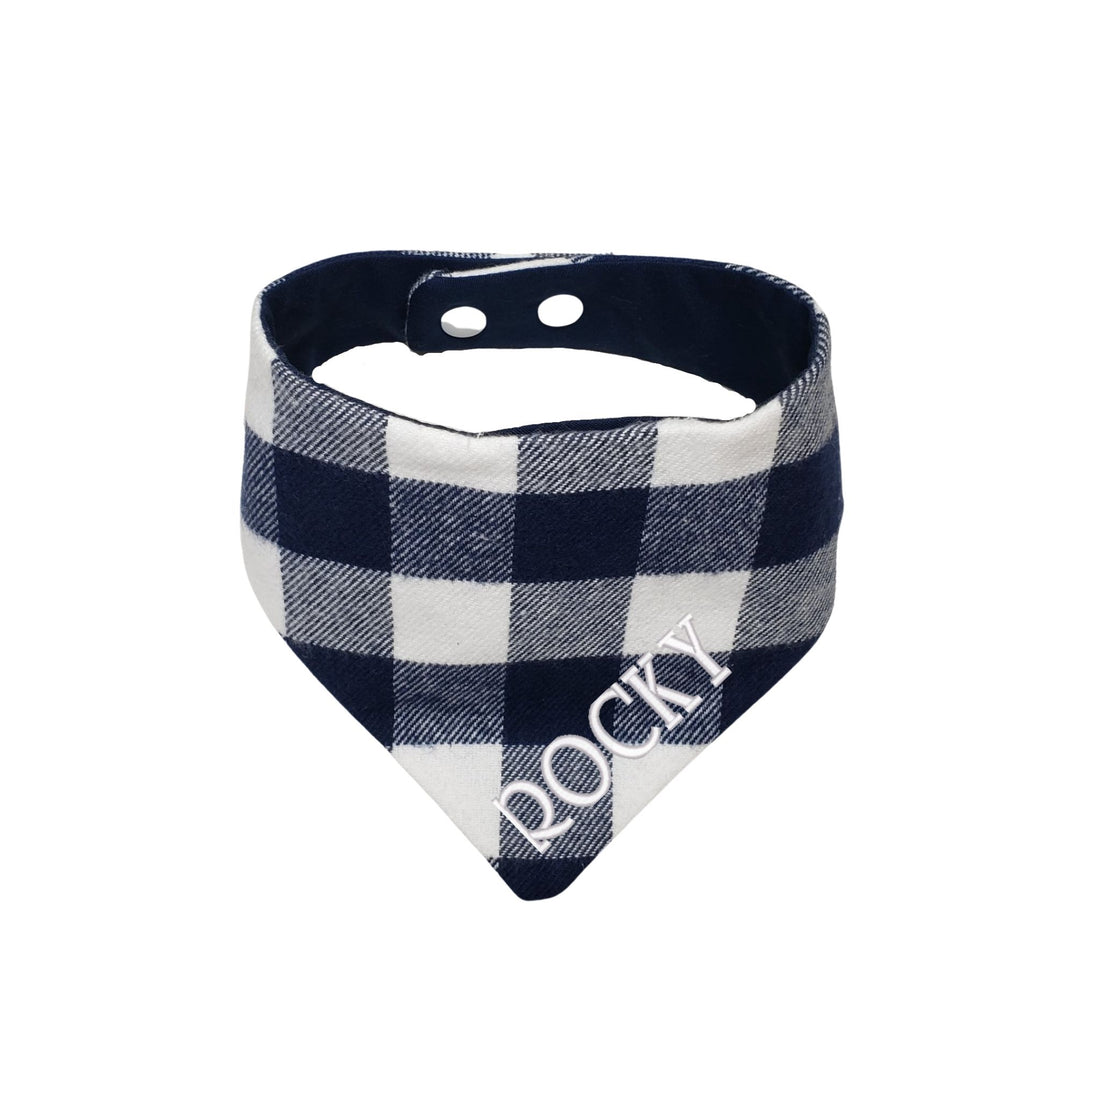 Personalized Blue and White Buffalo Plaid embroidered reversible dog bandana with snaps - Life Has Just Begun